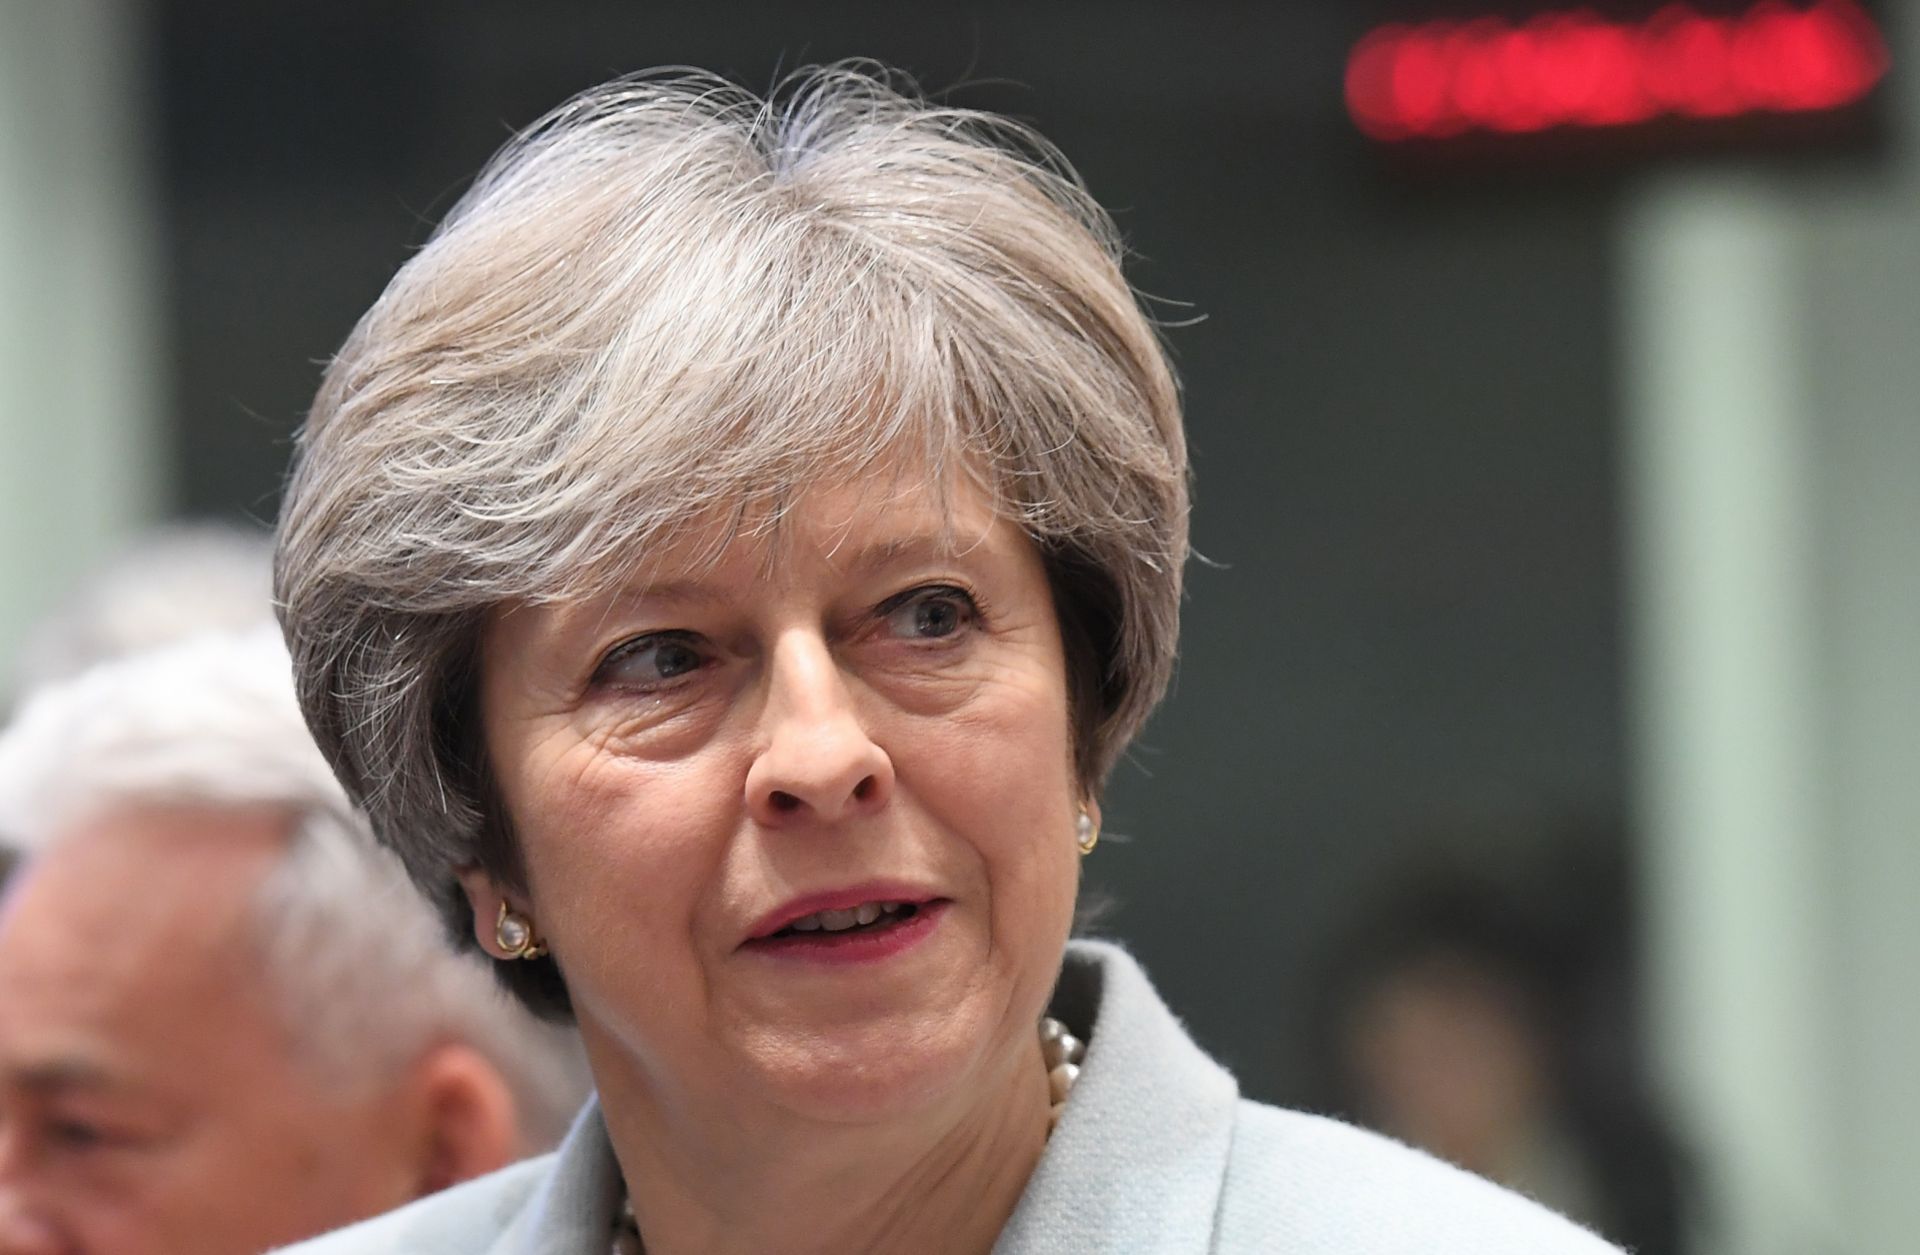 British Prime Minister Theresa May is scheduled to meet Dec. 4 with EU Commission President Jean-Claude Juncker.